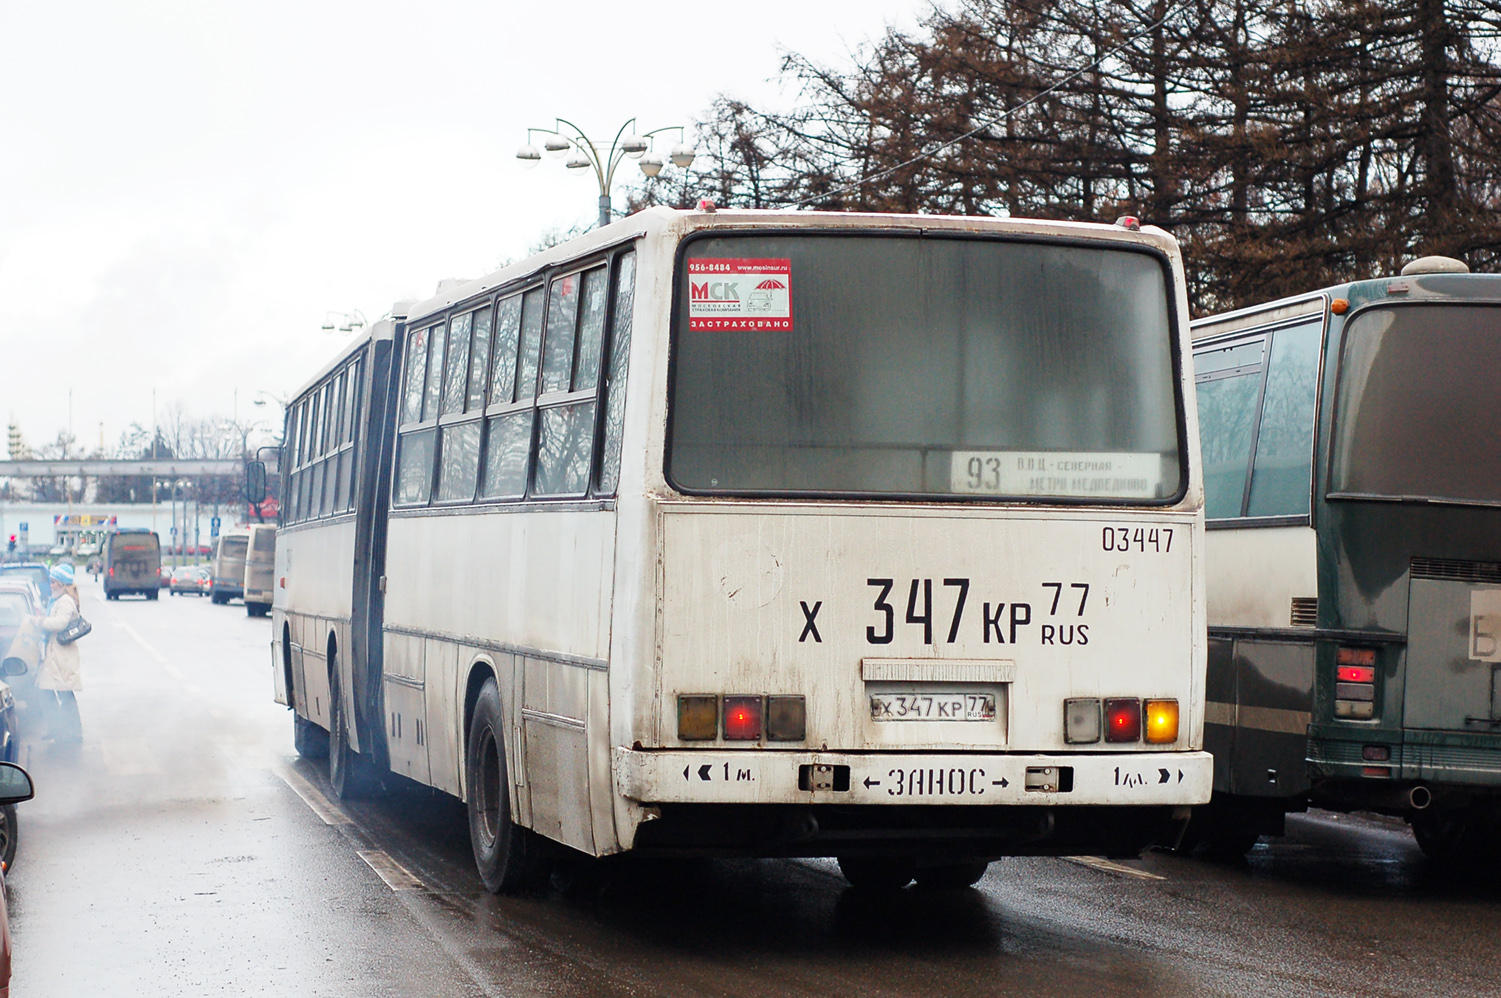 Moscow, Ikarus 283.00 # 03447